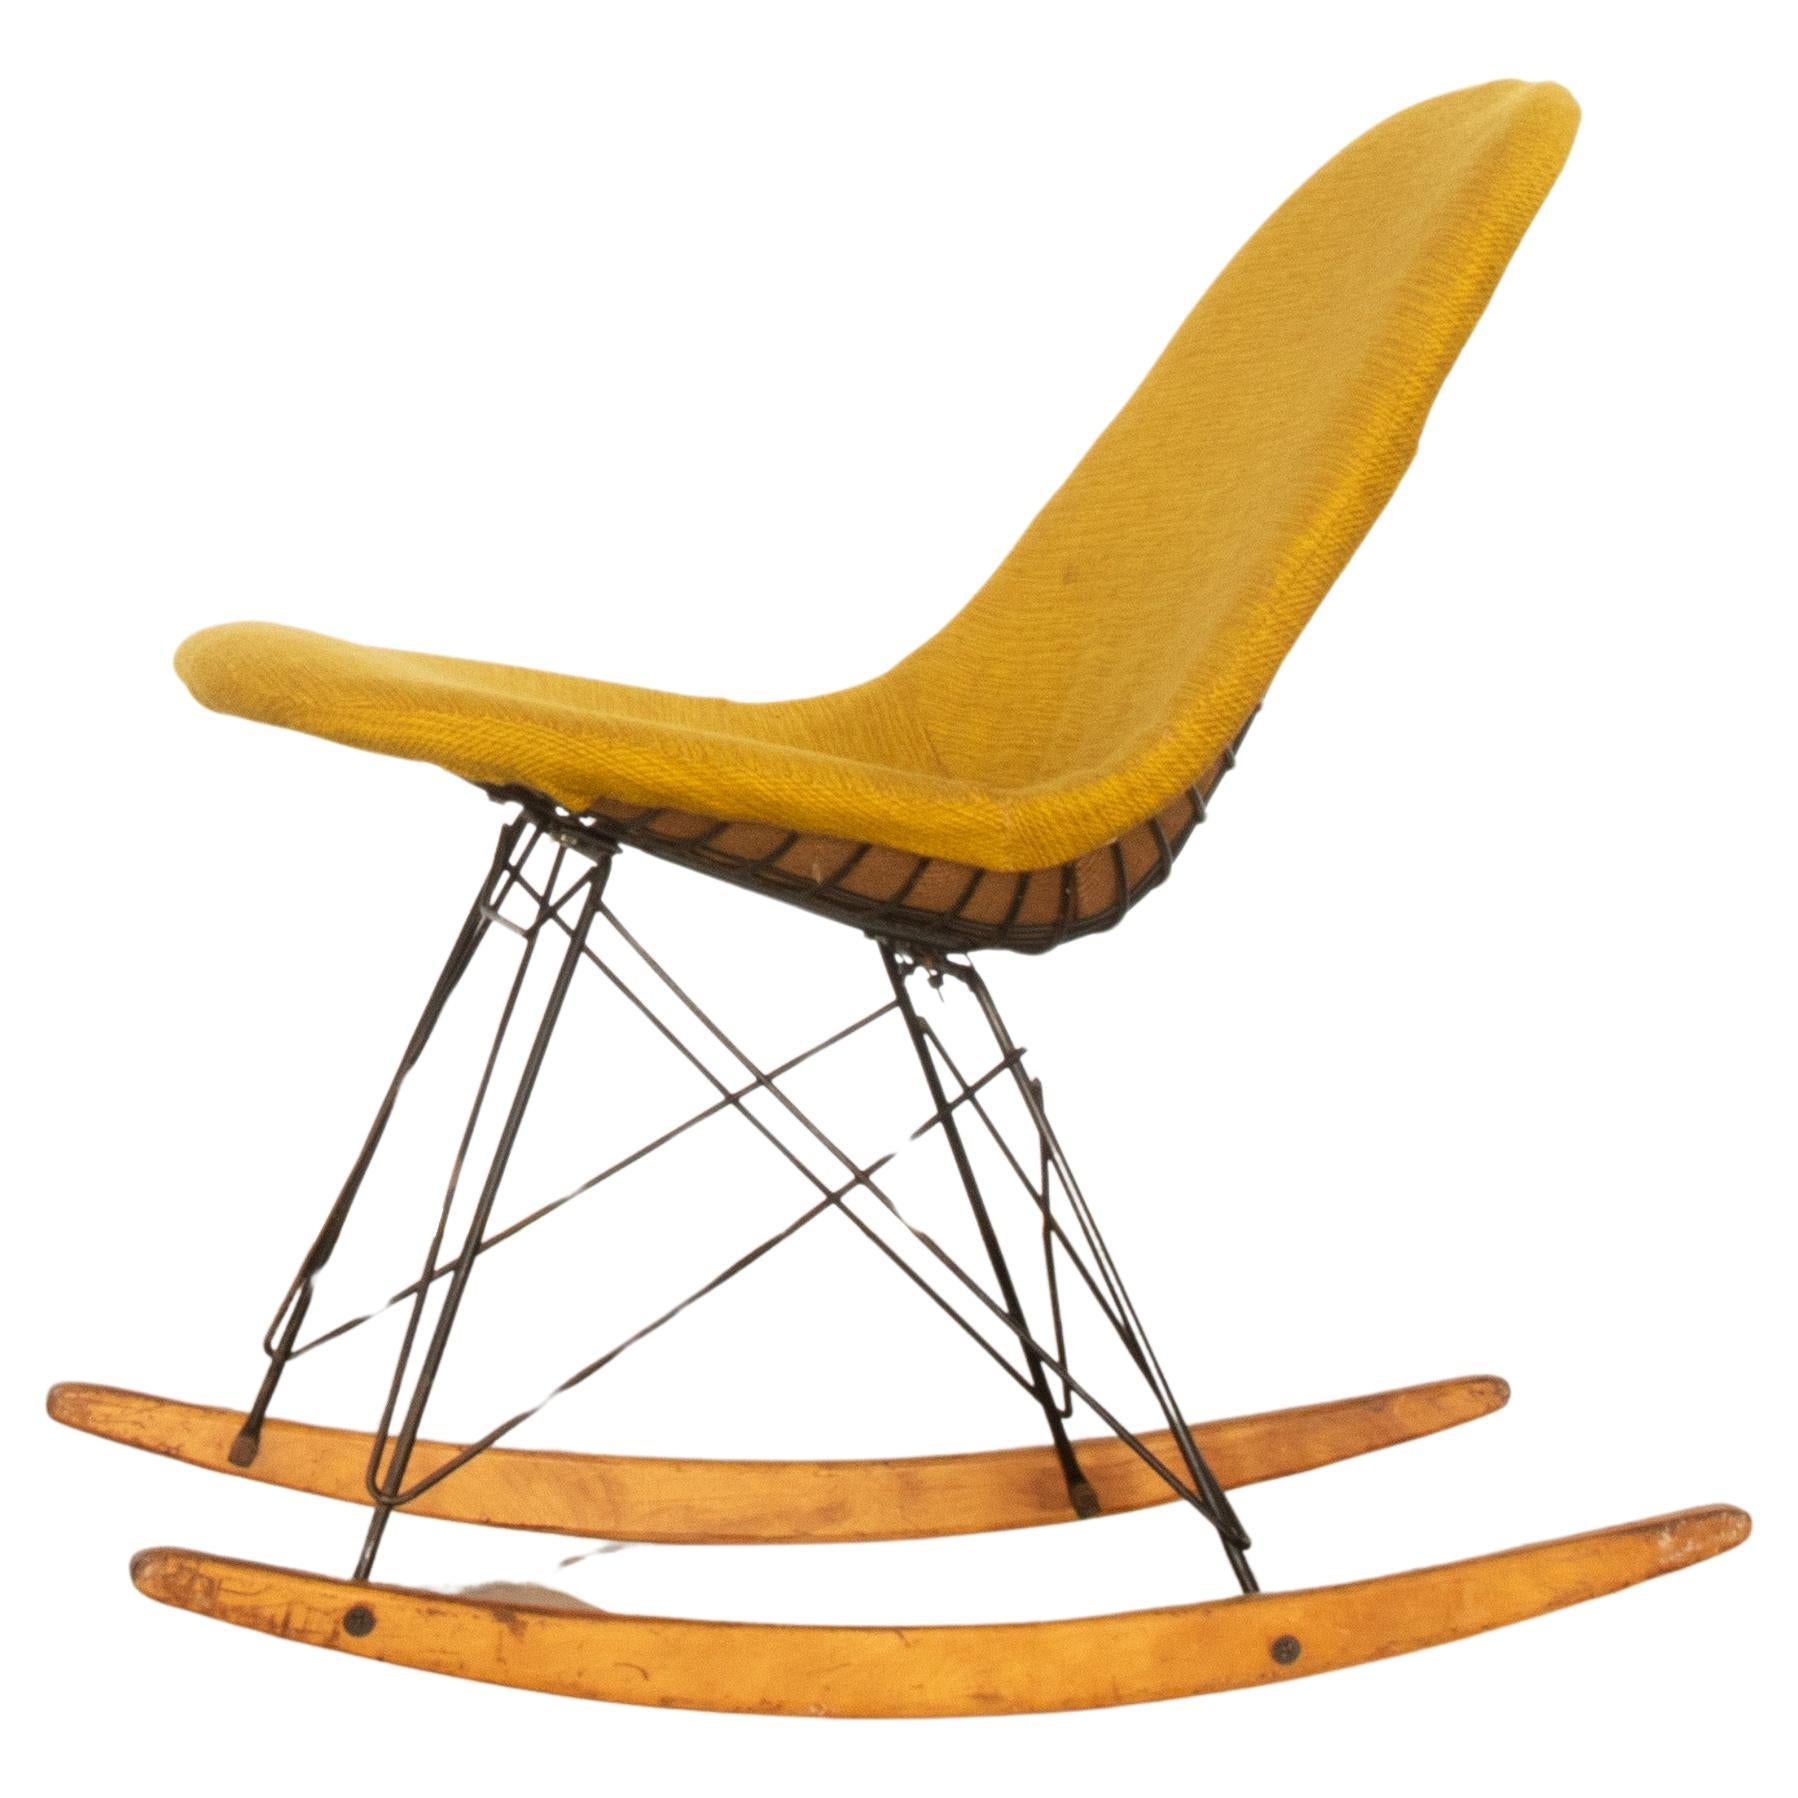 1950s Eames RKR Rocking Wire Side Chair with Yellow Hopsak original cover.